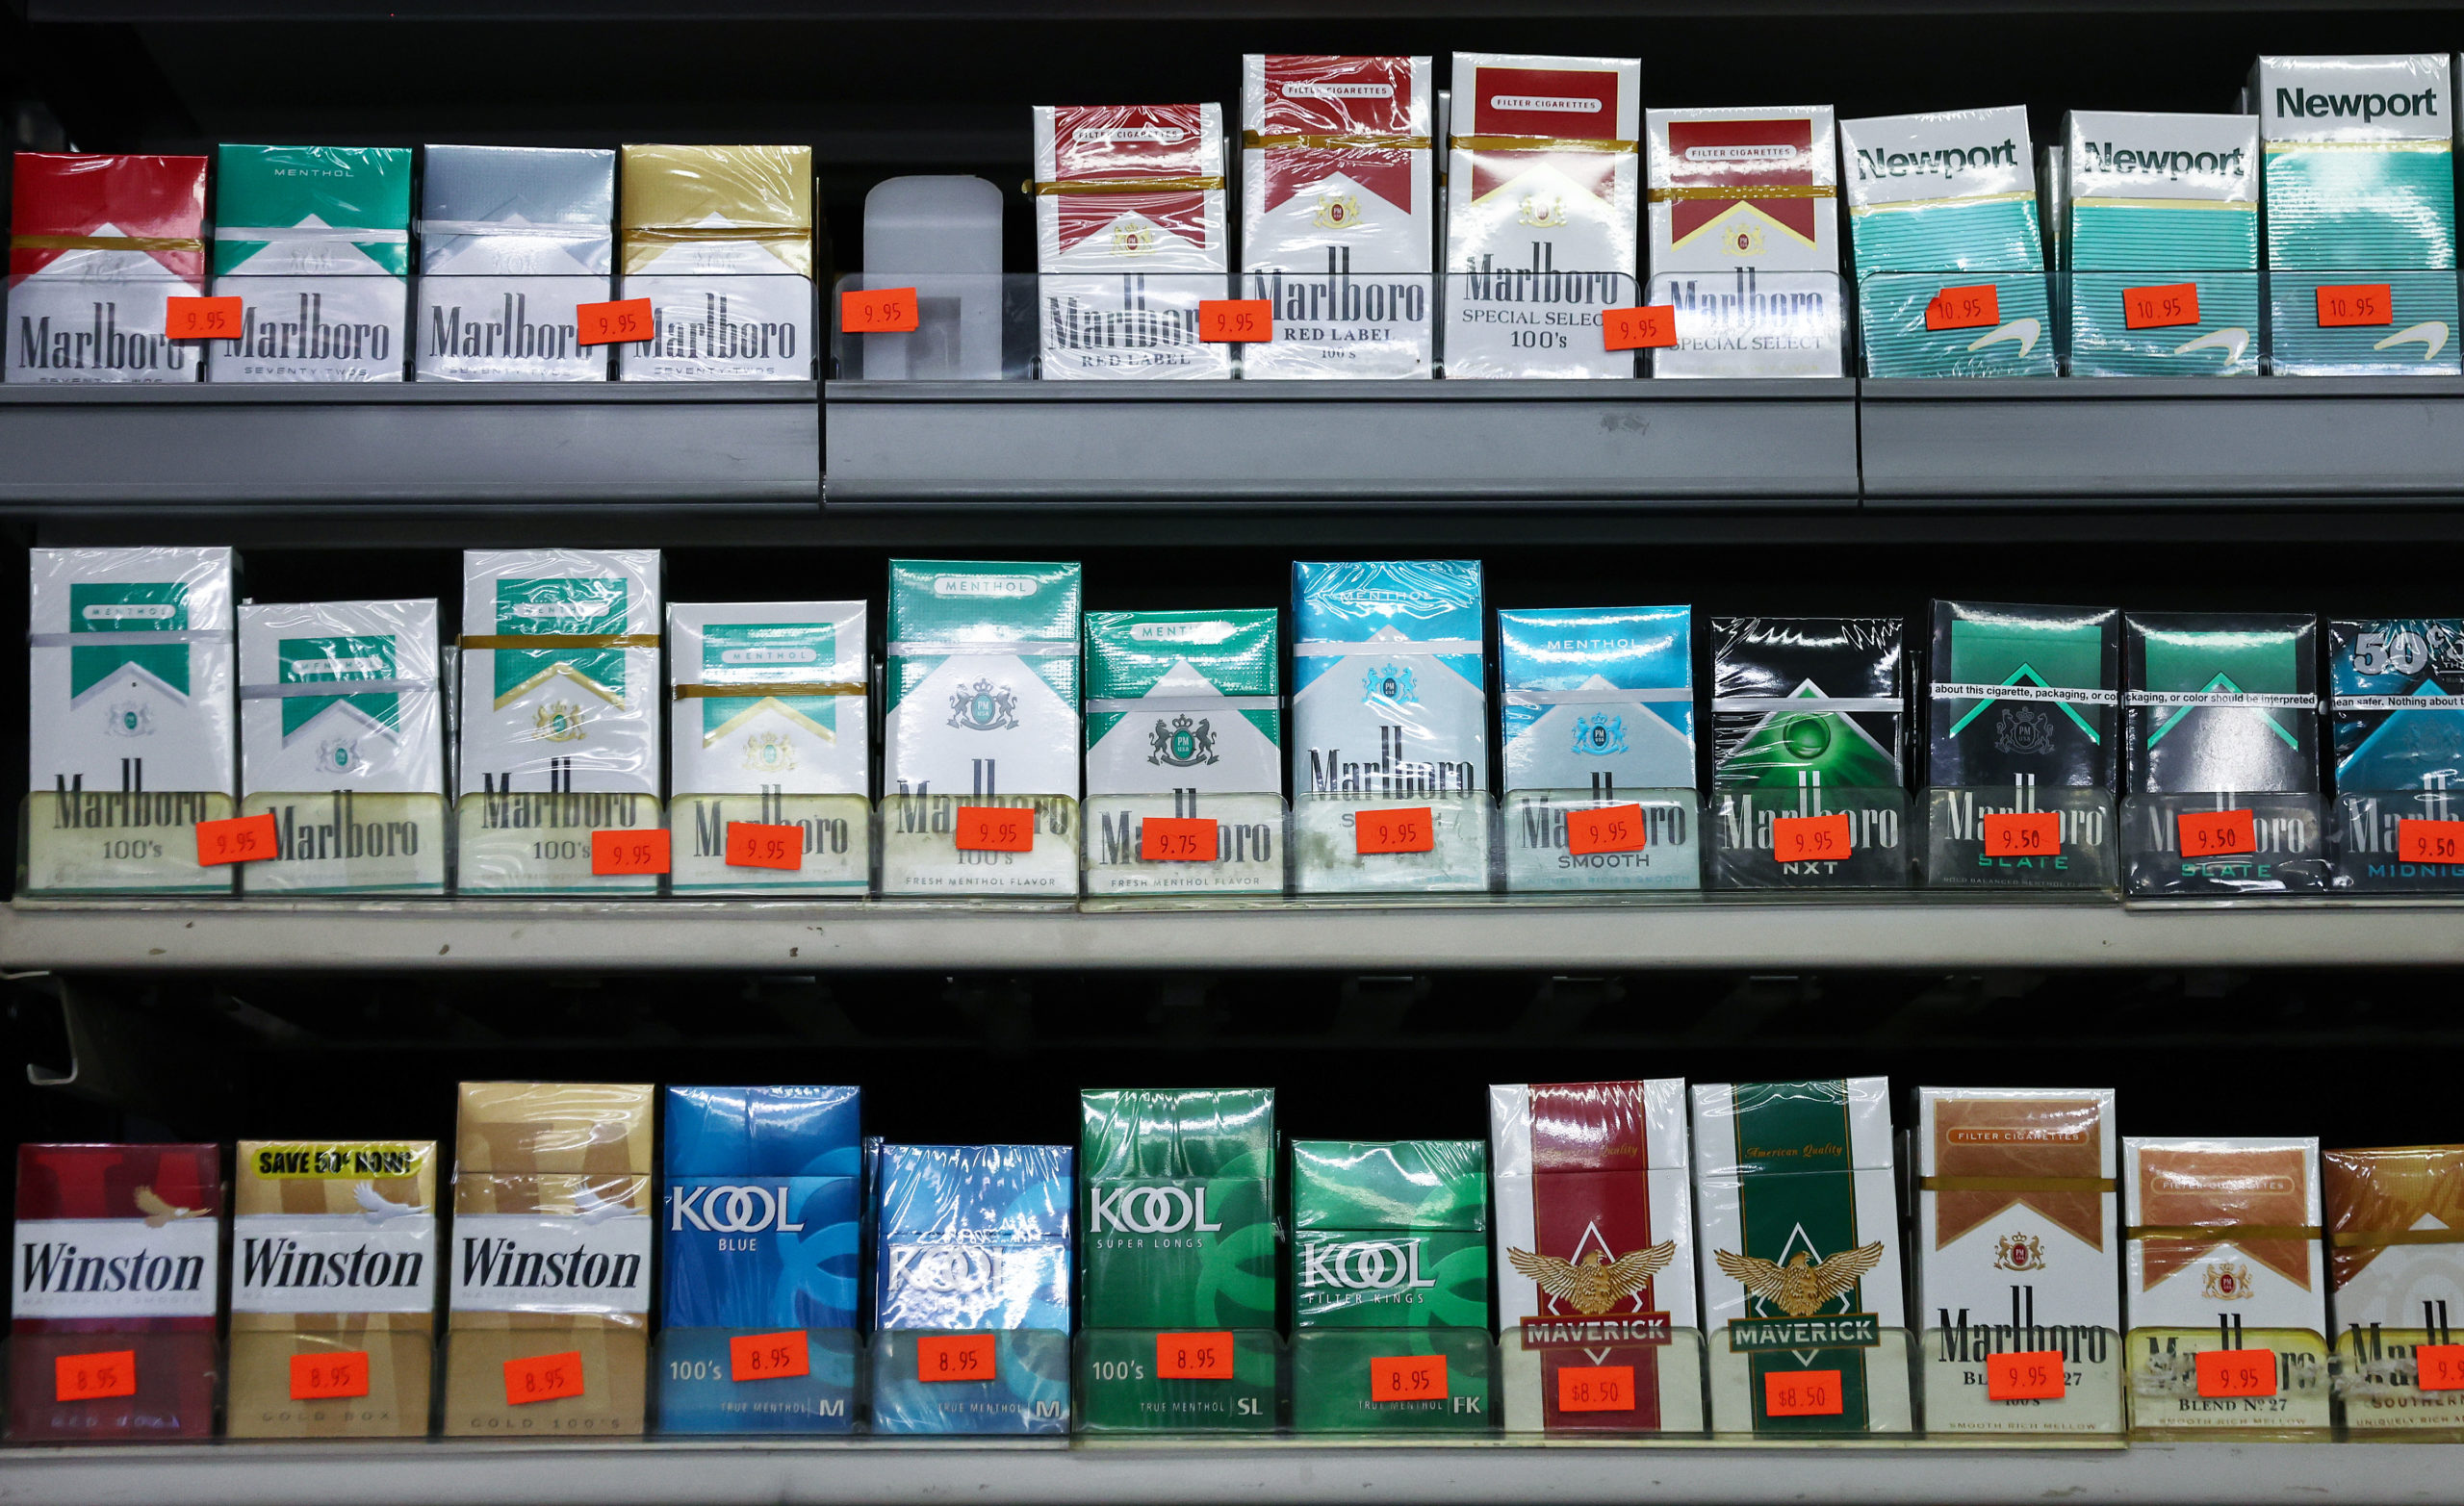 Packs of menthol-flavored and non-menthol cigarettes are displayed for sale in a smoke shop on April 28, 2022 in Los Angeles, California. The Food and Drug Administration (FDA) is proposing to ban both menthol-flavored cigarettes and flavored cigars in a move hailed by public health experts which could potentially lead to 1.3 million people quitting smoking. (Photo by Mario Tama/Getty Images)